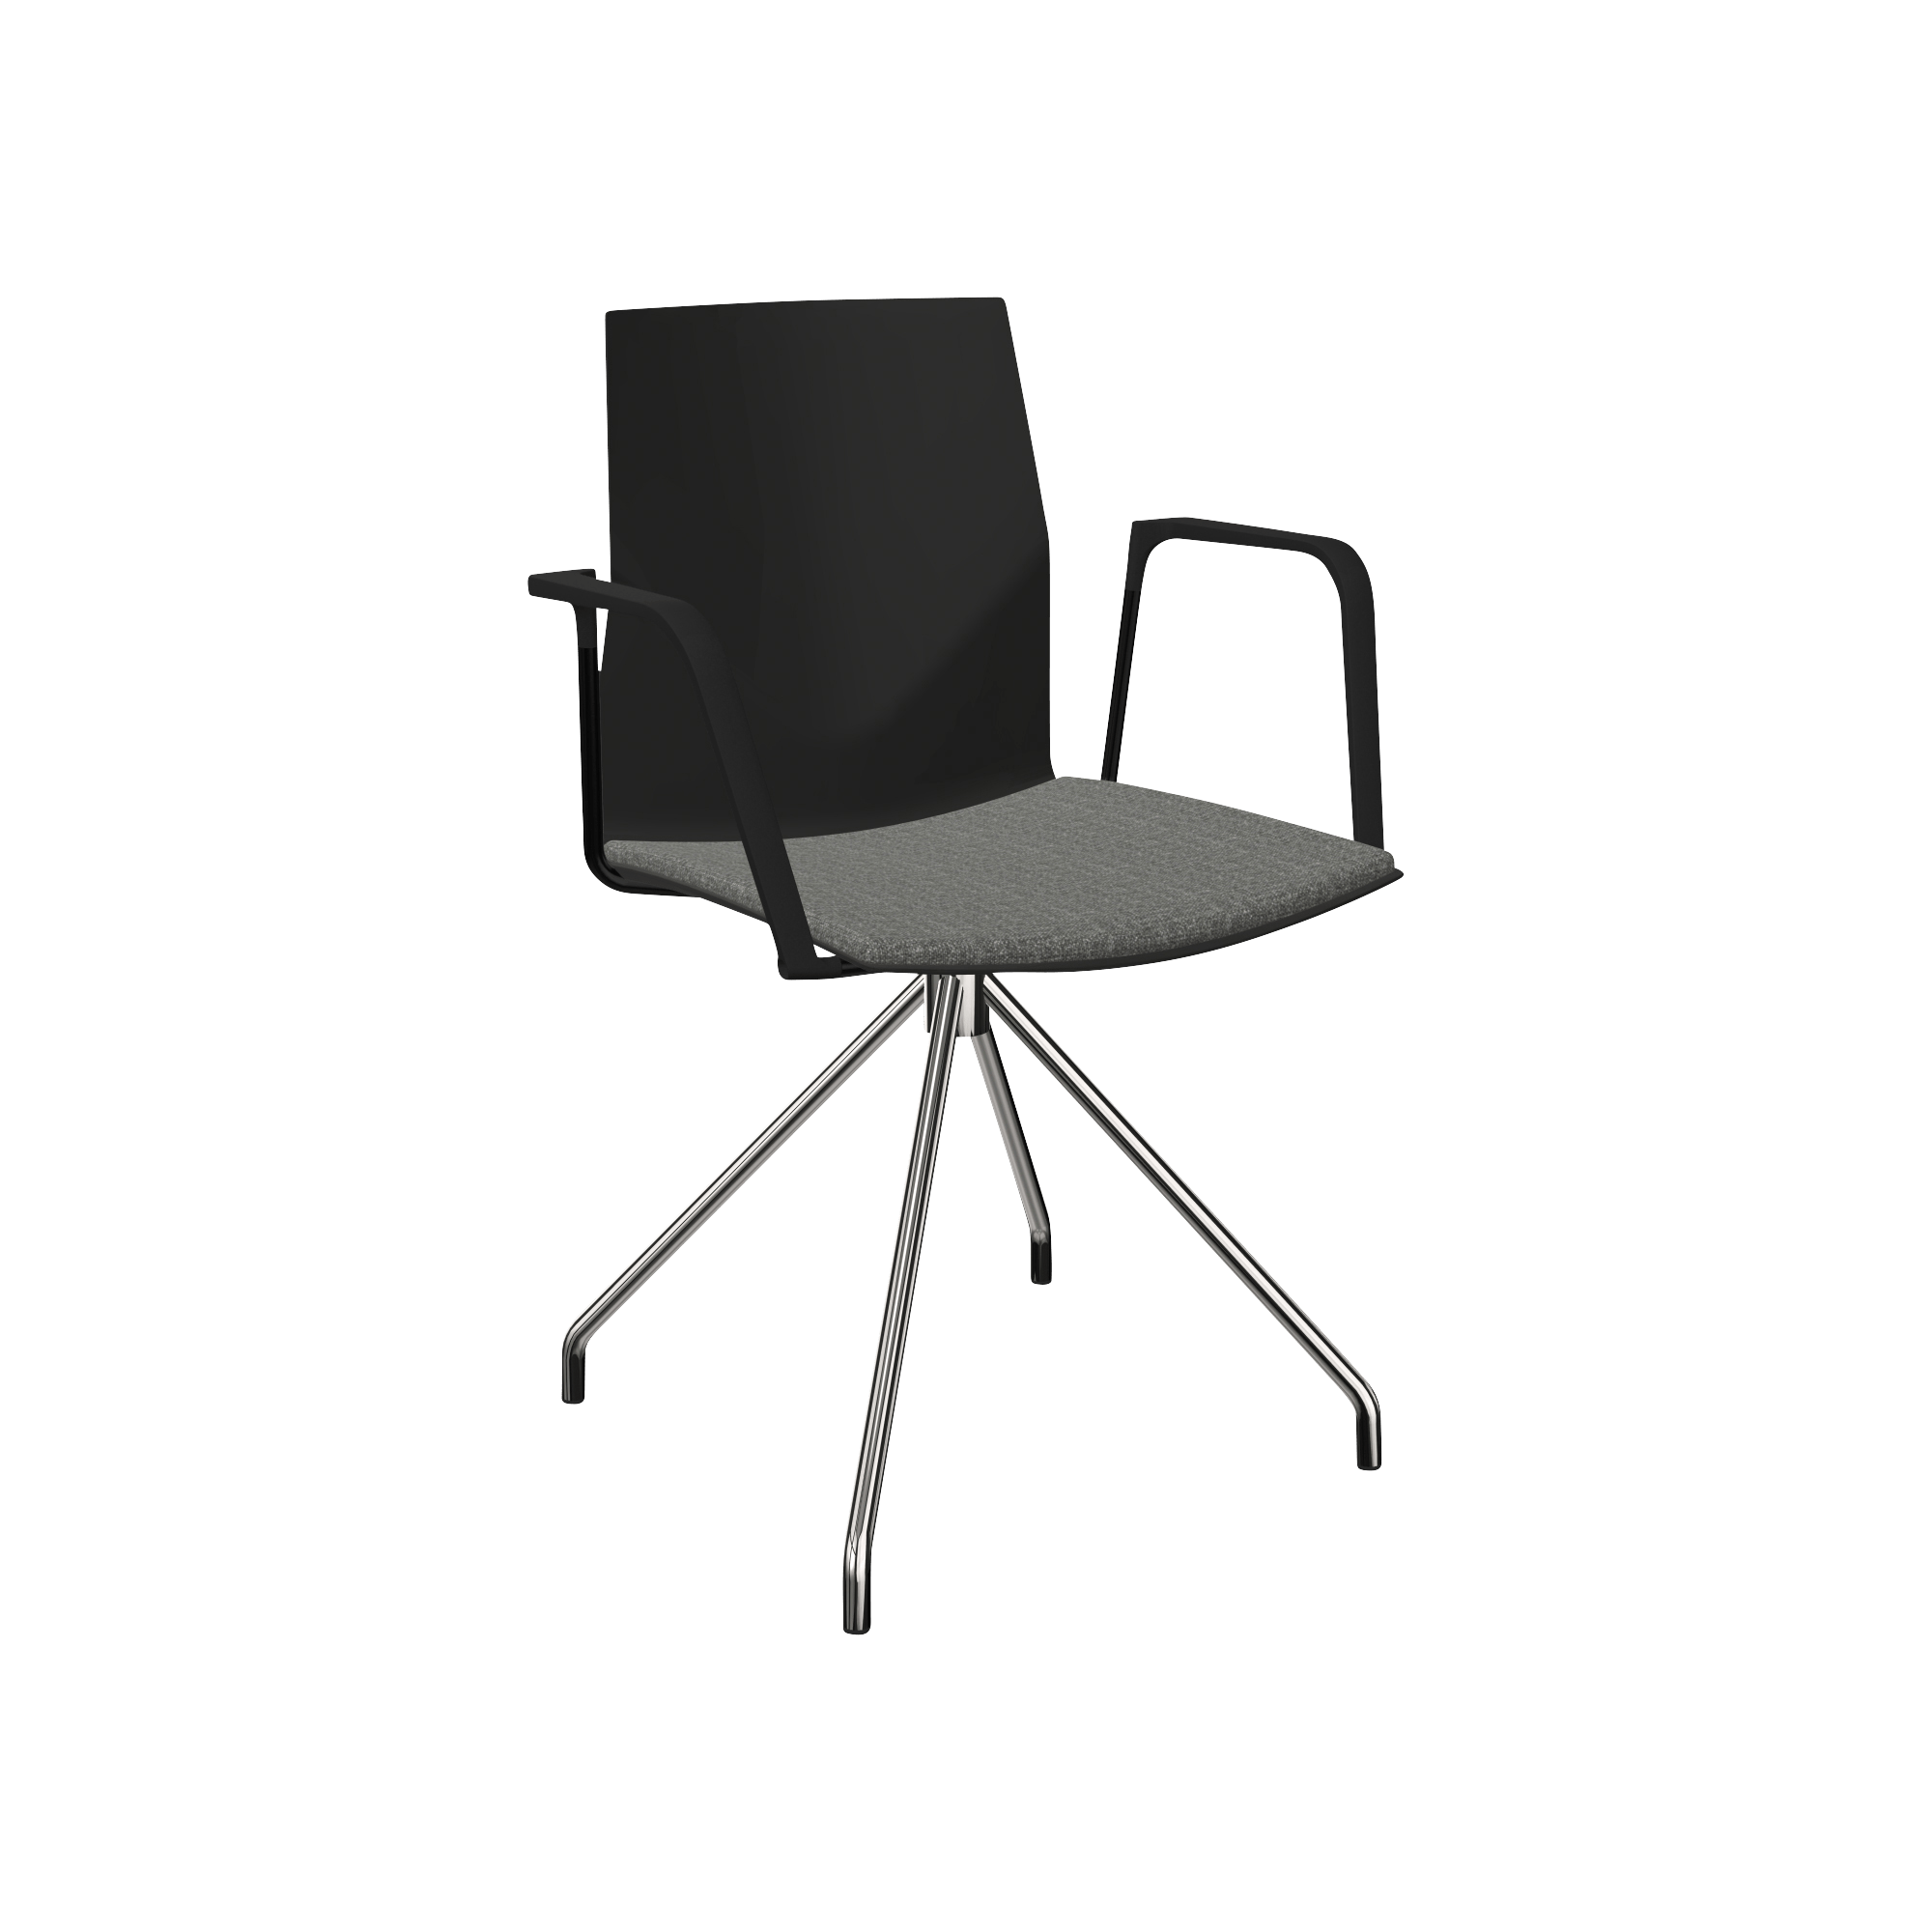 Black chair with grey seat and black arm rests and chrome leg